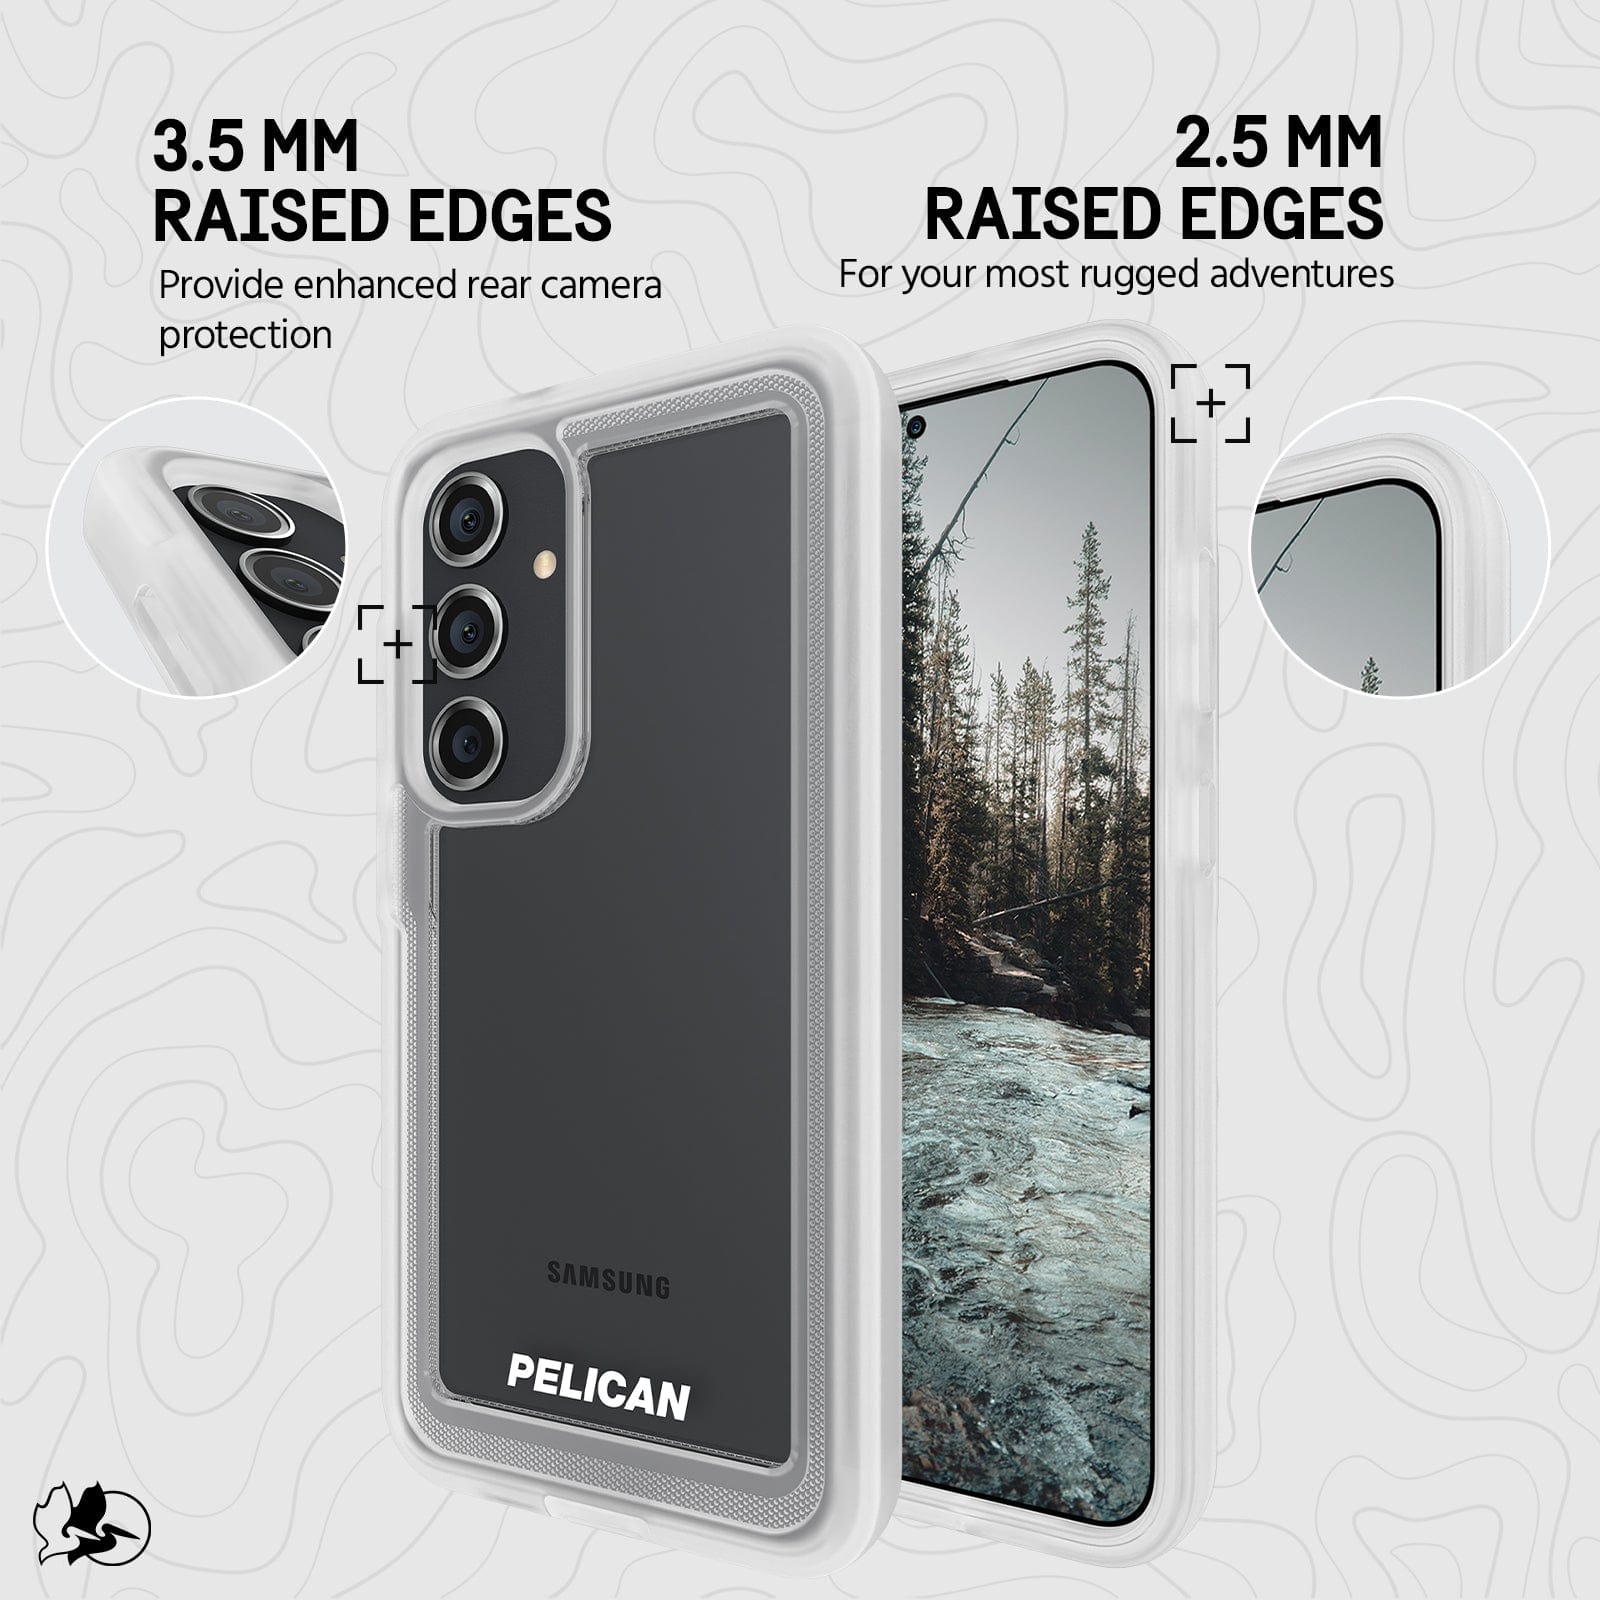 3.5MM Raised Edges. Provide enhanced rear camera protection. 2.5mm raised edges for your most rugged adventures